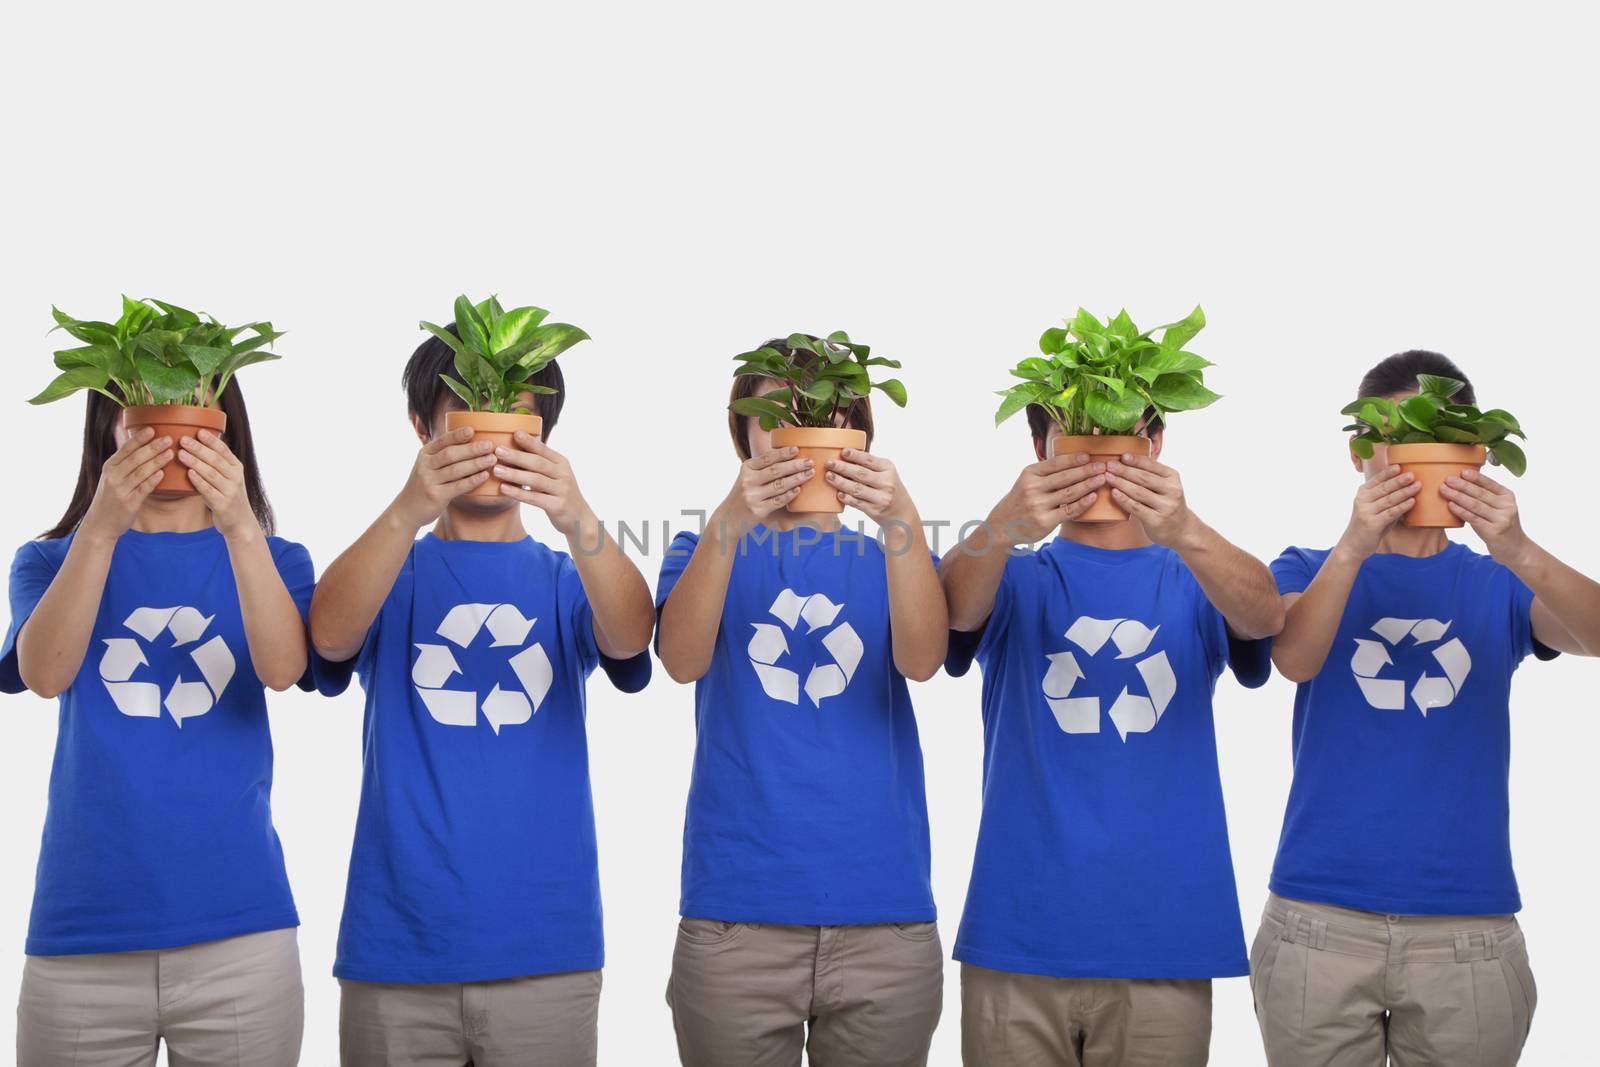 Group of people holding plants, obscuring faces, studio shot